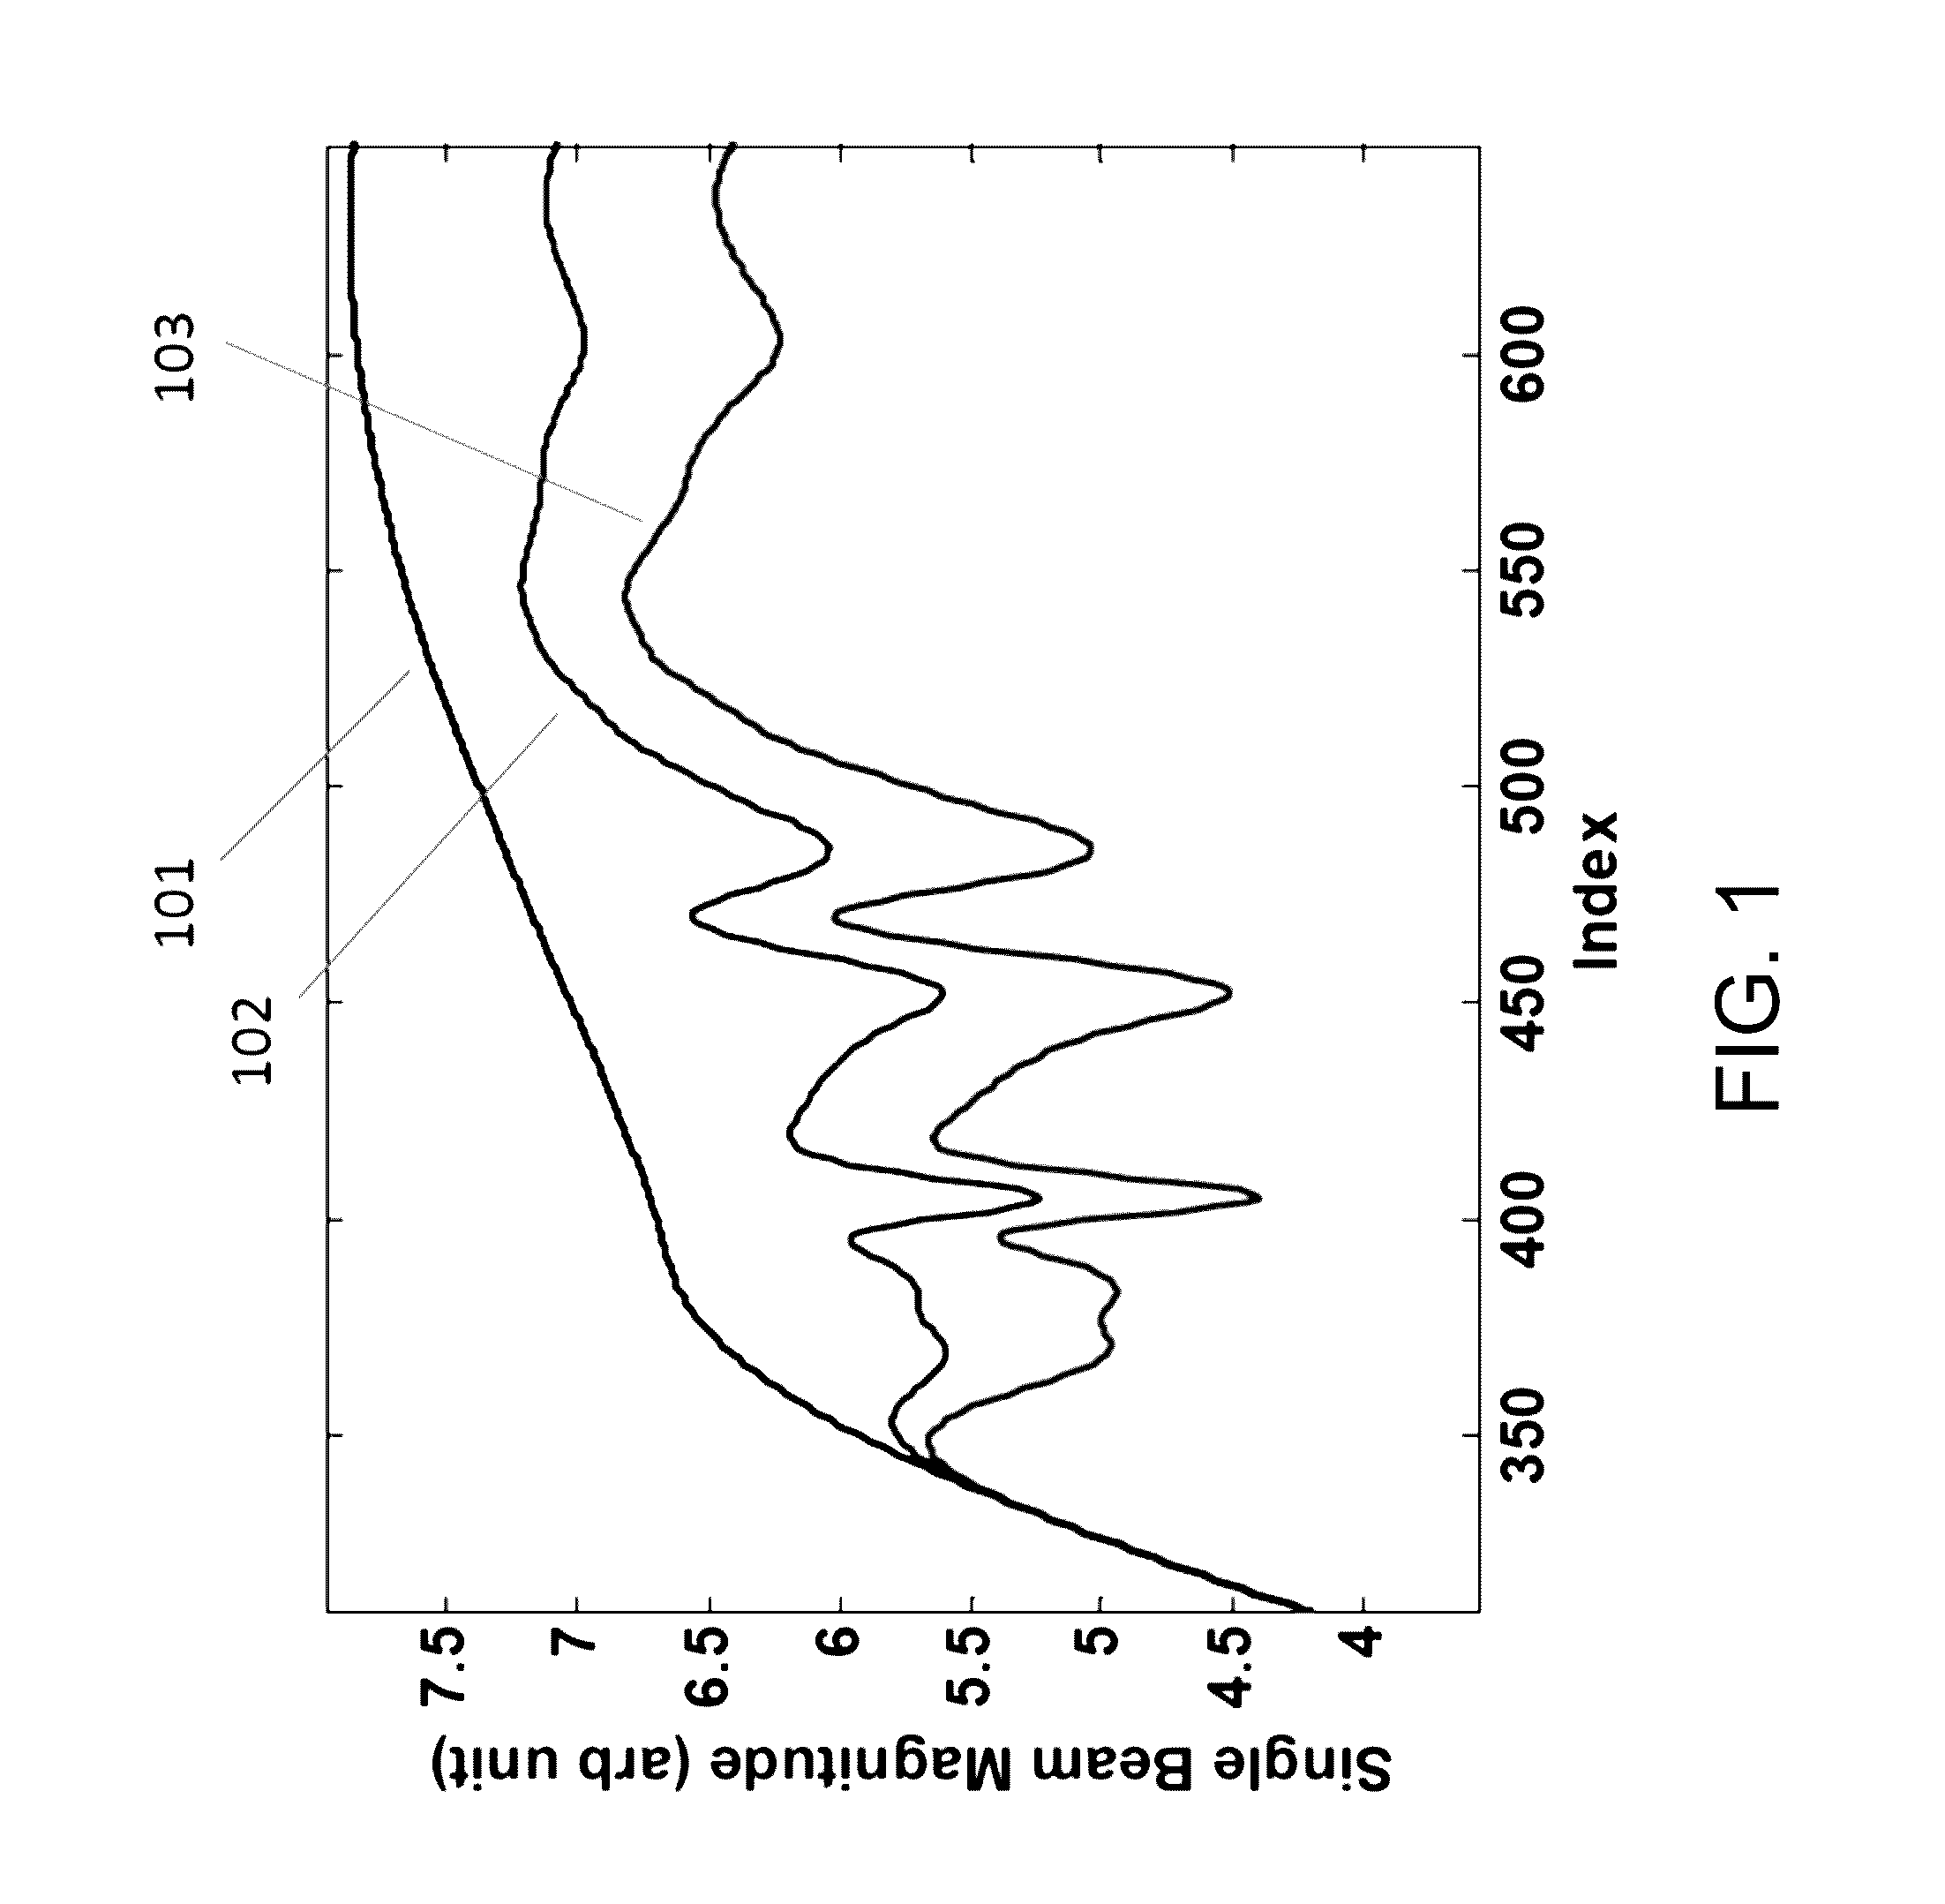 Systems and methods for pressure differential molecular spectroscopy of compressible fluids